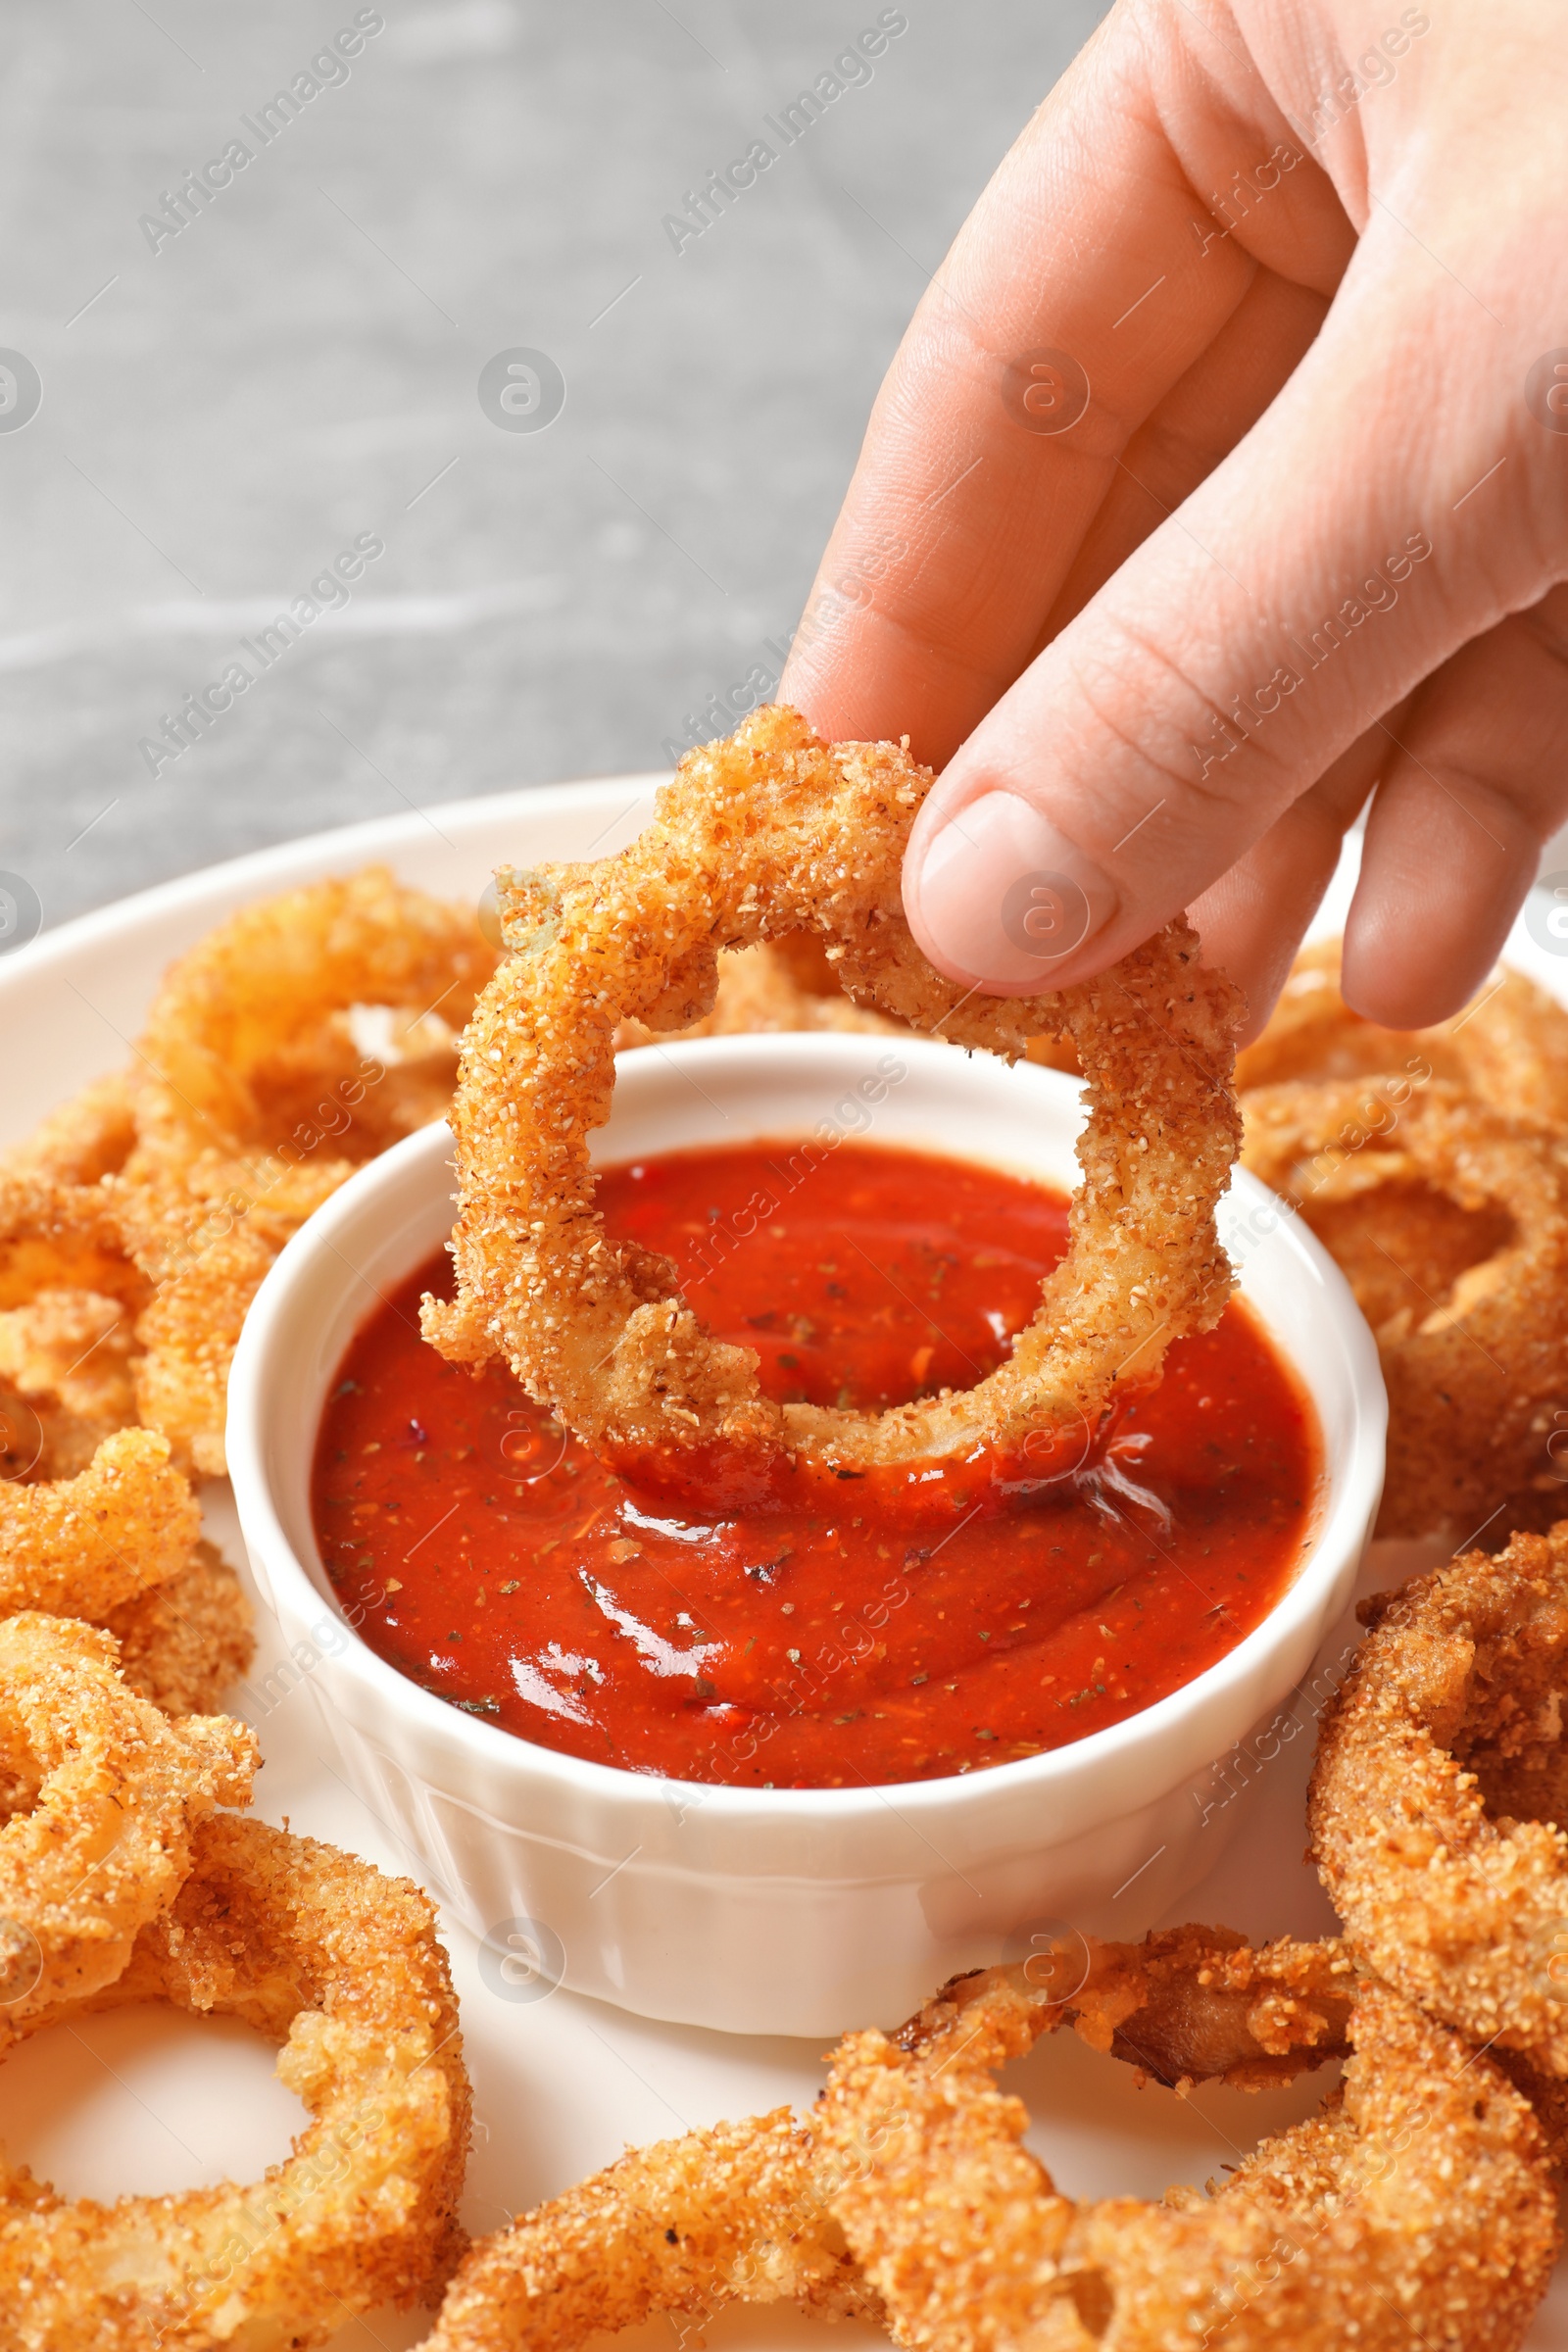 Photo of Woman dipping crunchy fried onion ring in tomato sauce, closeup